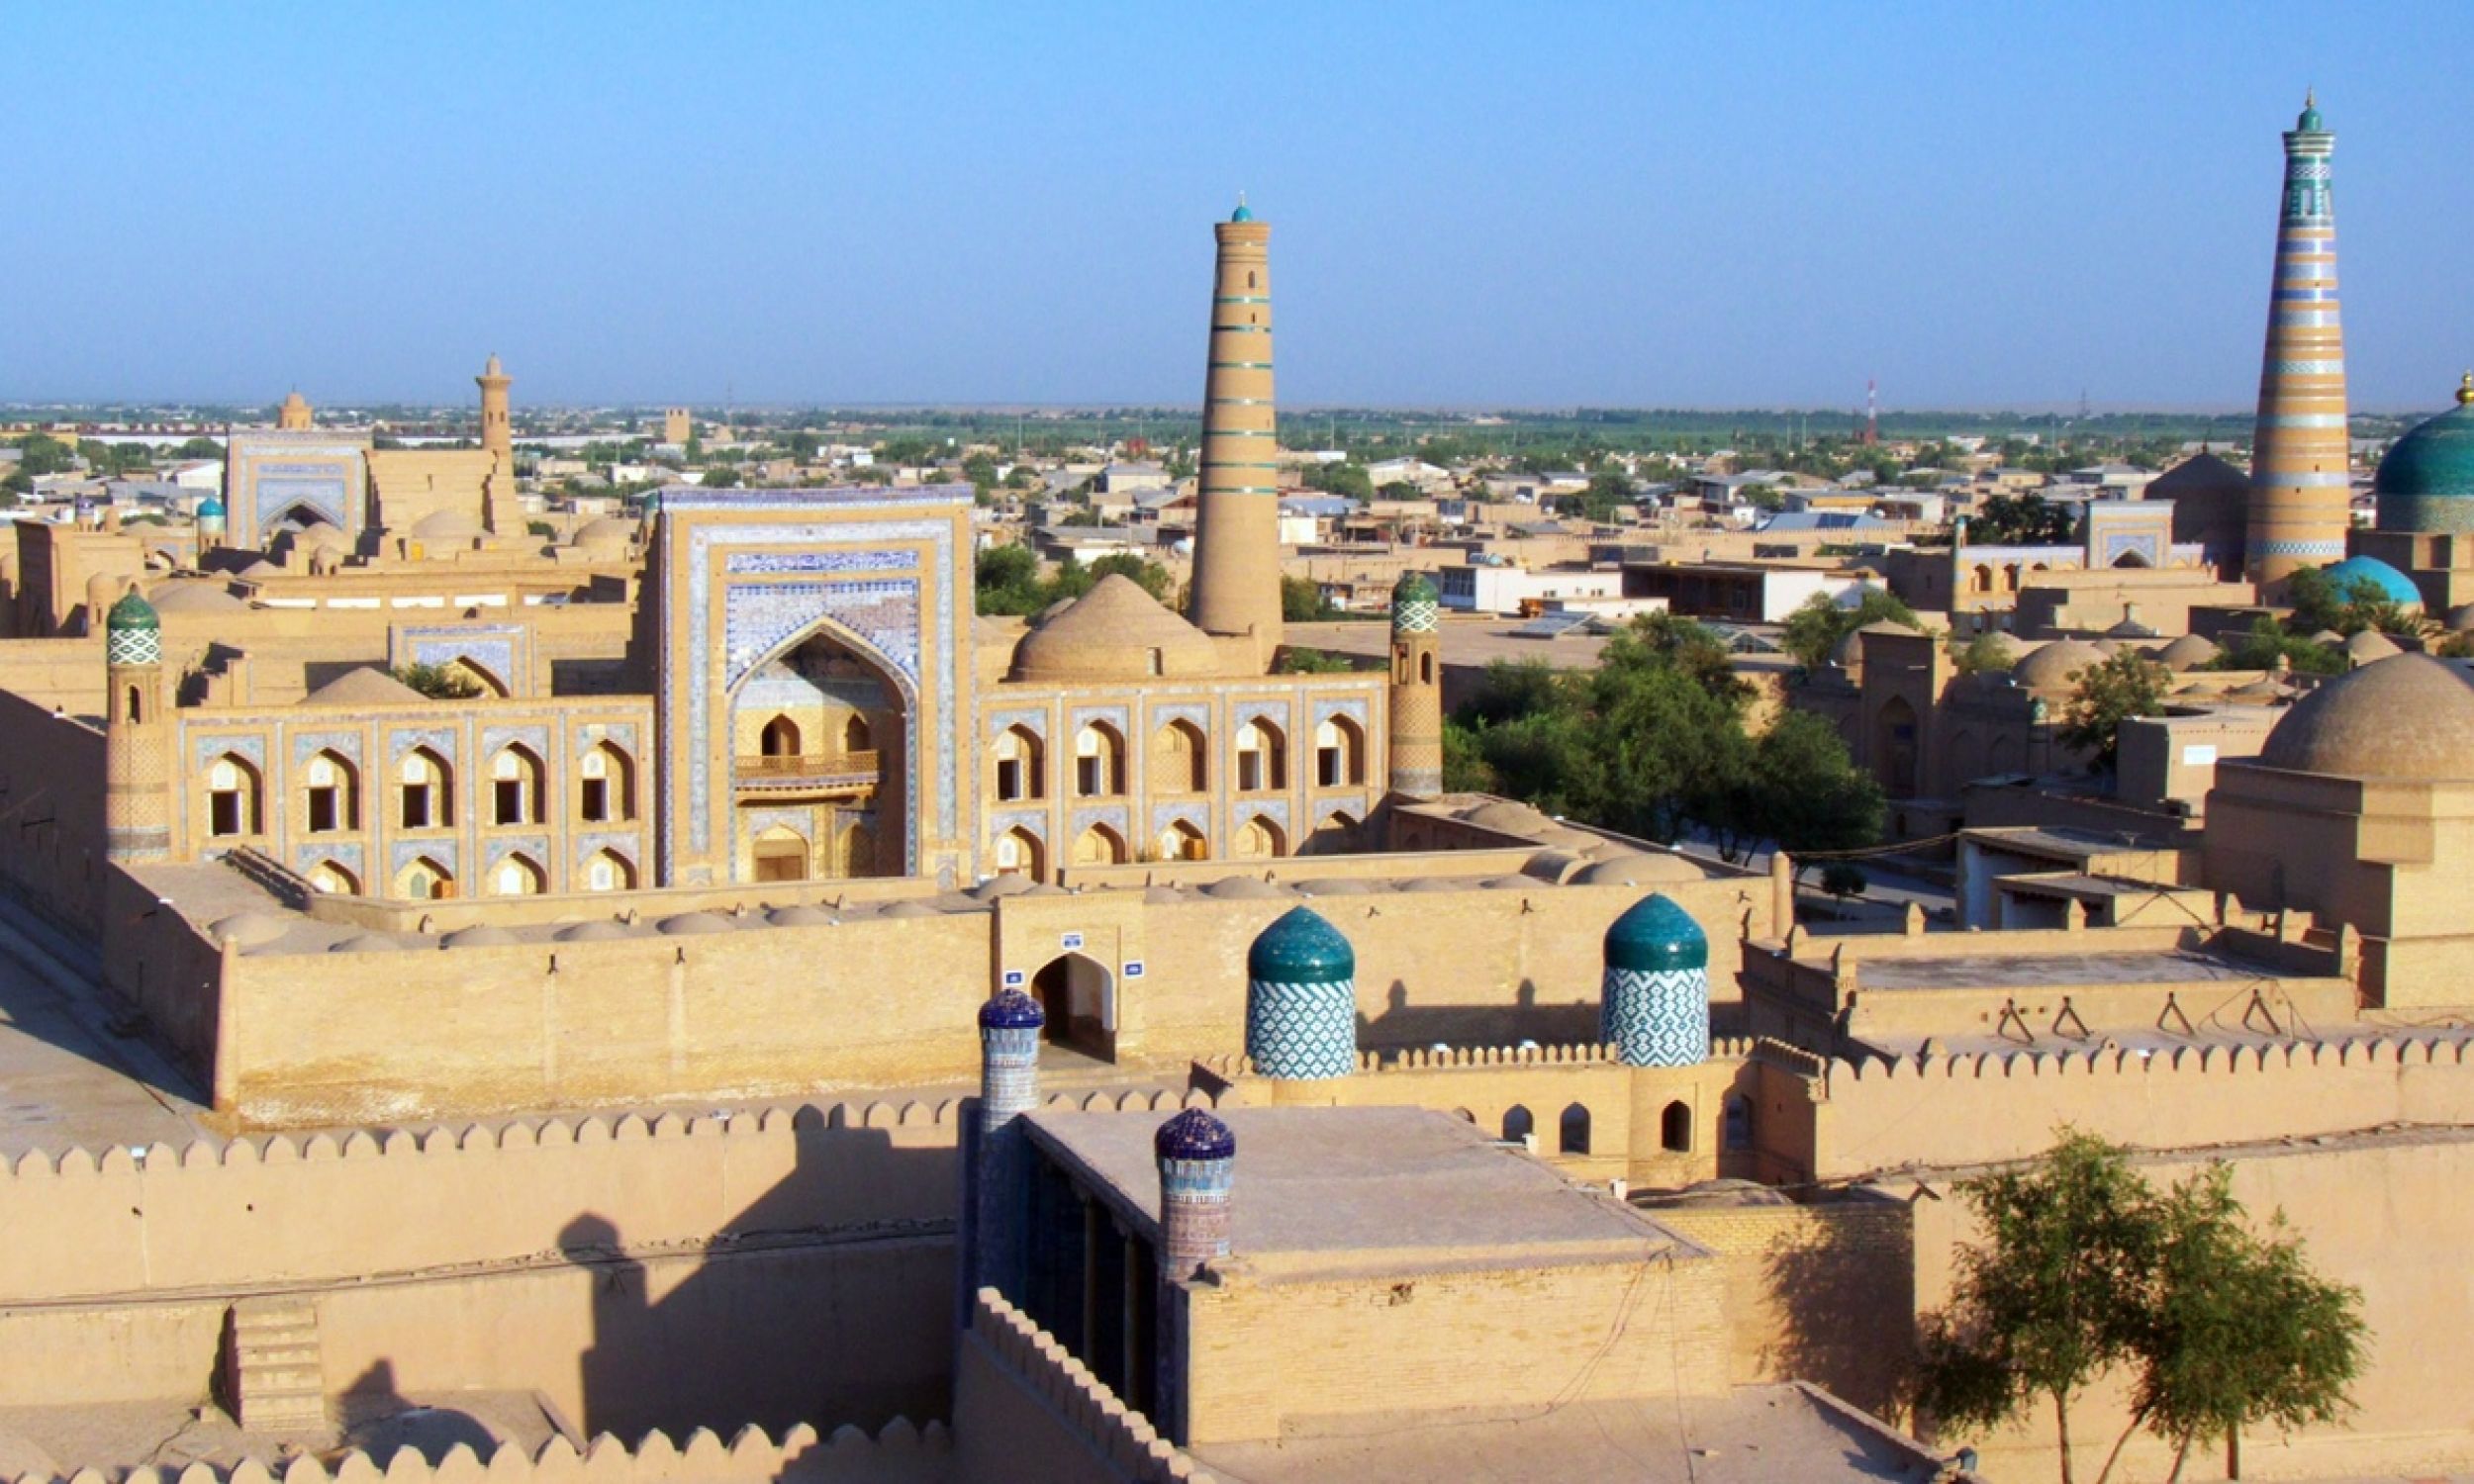 The current panorama of Khiva, seen from the city walls. Photo: Fulvio Falls from Turin, CC BY-SA 2.0, Wikimedia